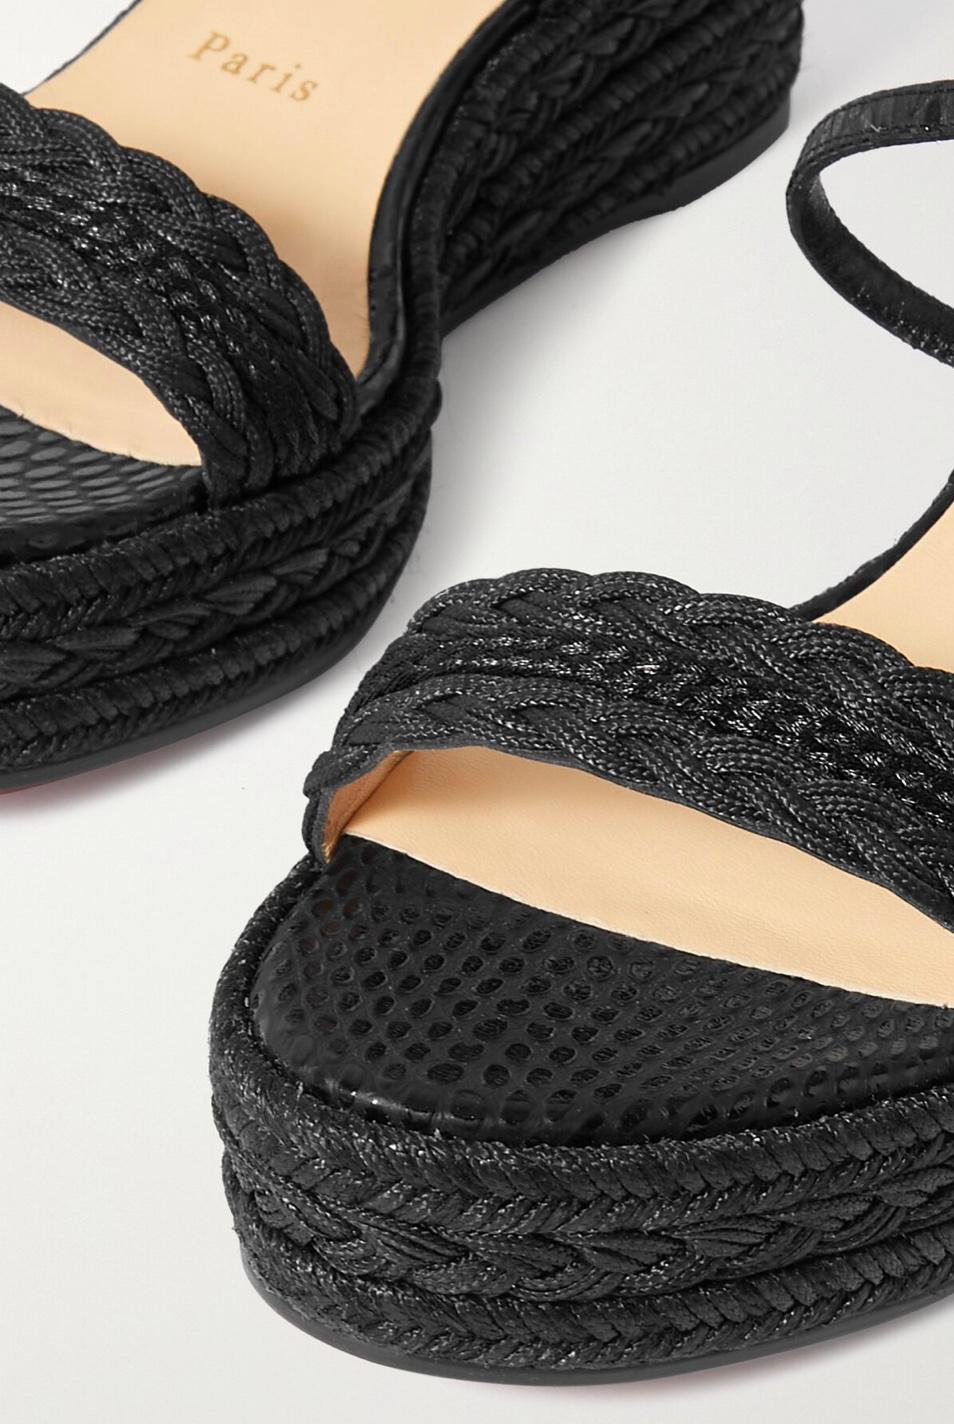 Christian Louboutin's 'Bodrum' espadrille sandals are the kind you'll be able to rely on for summers to come. Made in Italy from lizard-effect leather and woven cotton, they're set on a manageable wedge heel that's balanced by a comfortable platform